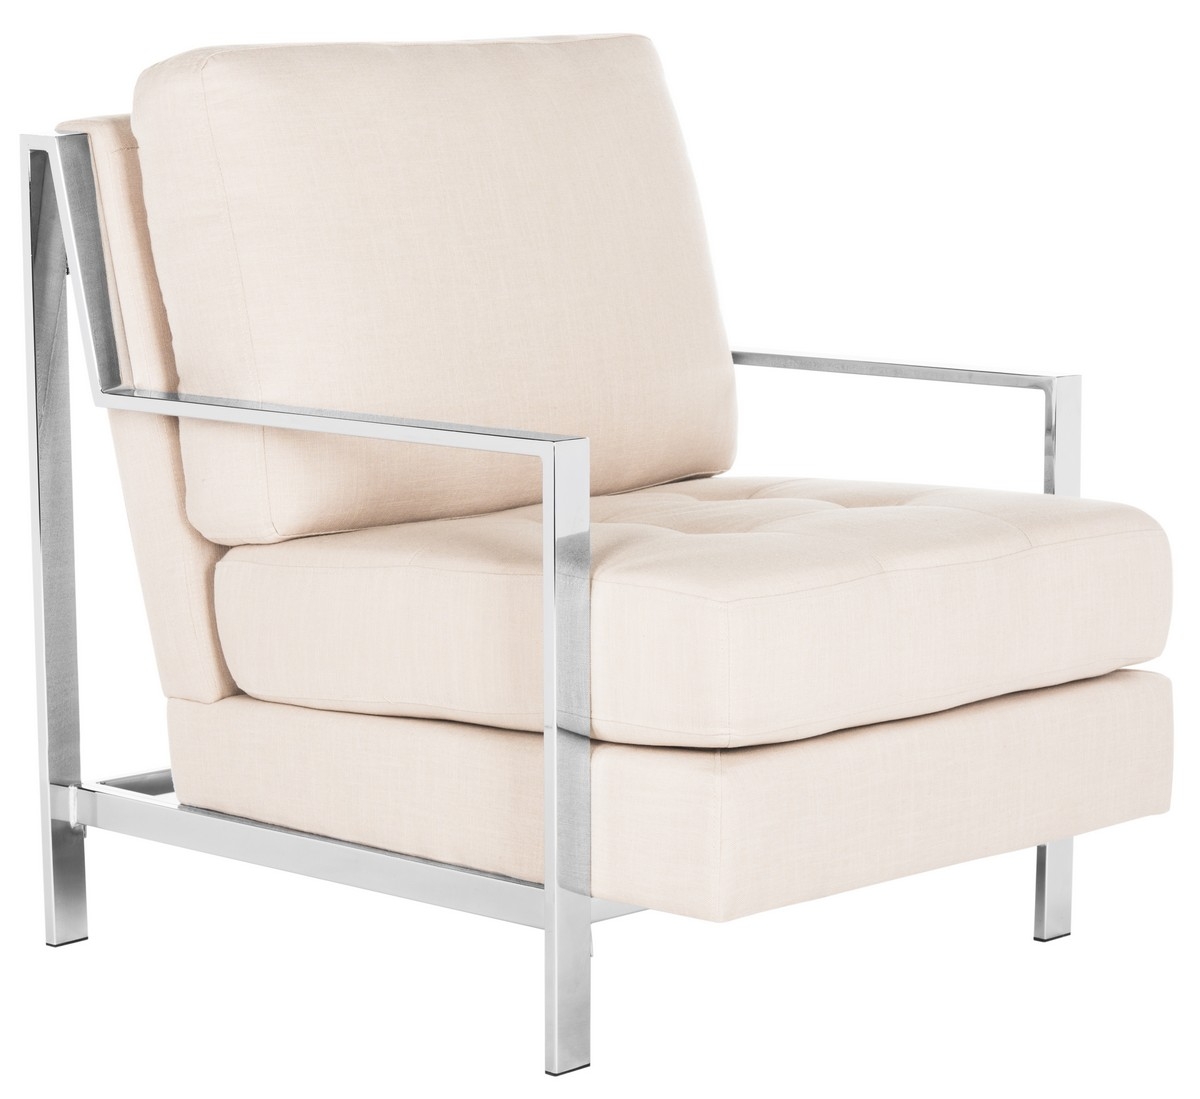 Walden Modern Tufted Linen Chrome Accent Chair - Beige - Arlo Home - Image 1